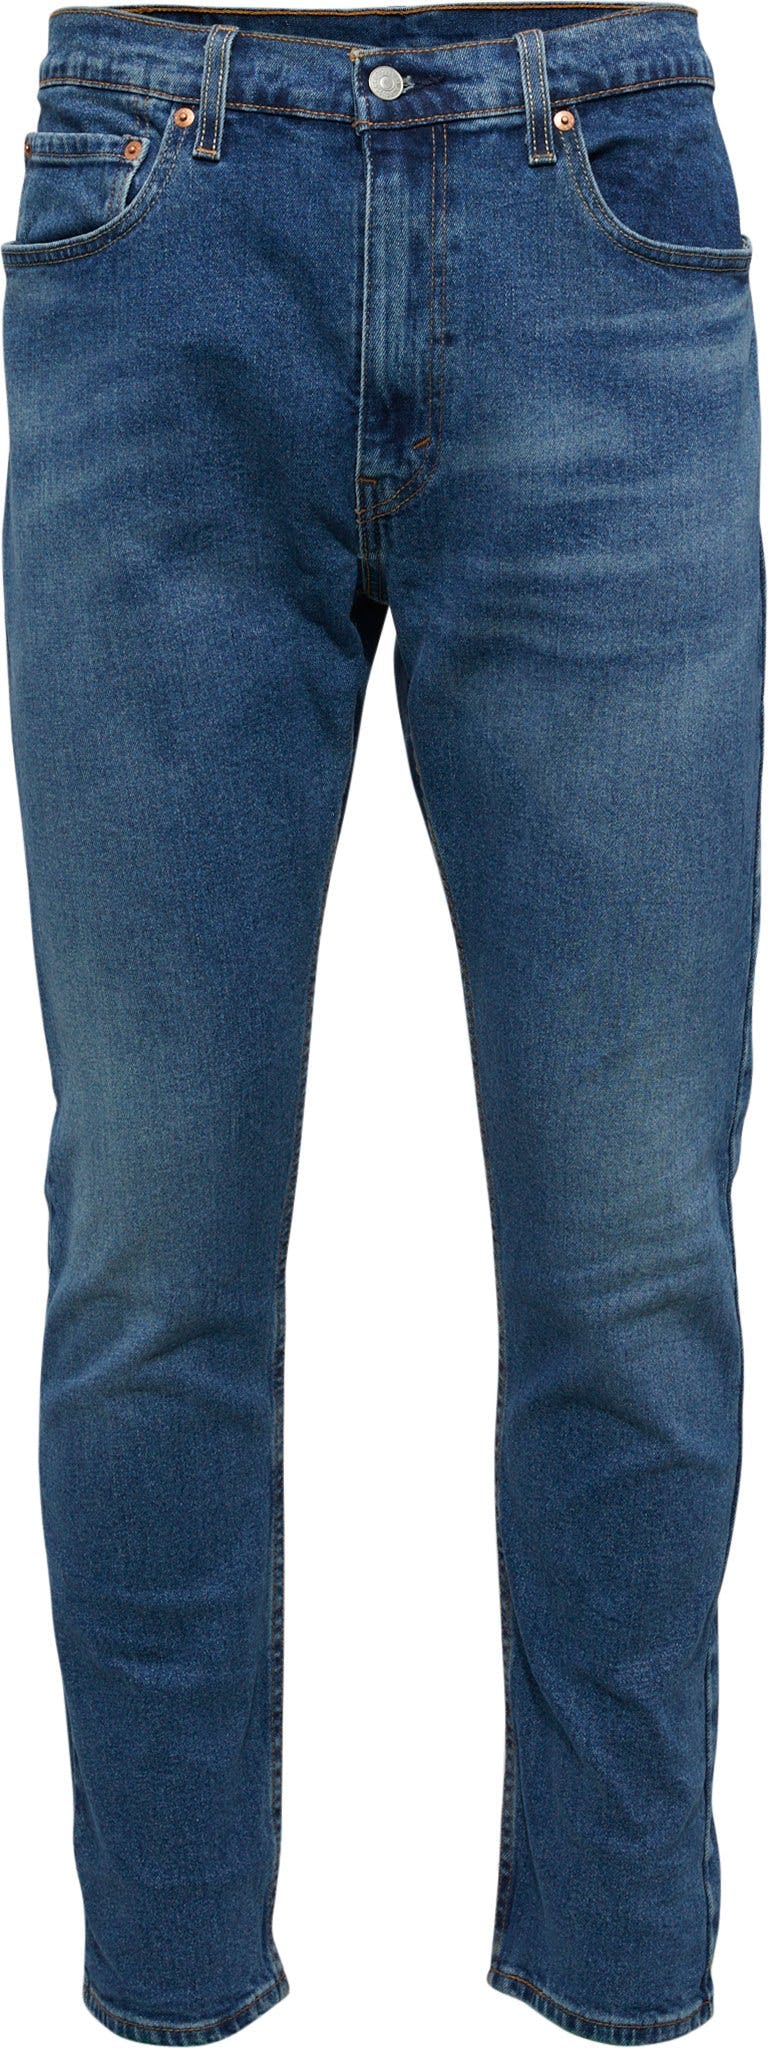 Product image for 512 Slim Taper Fit Jeans - Men's